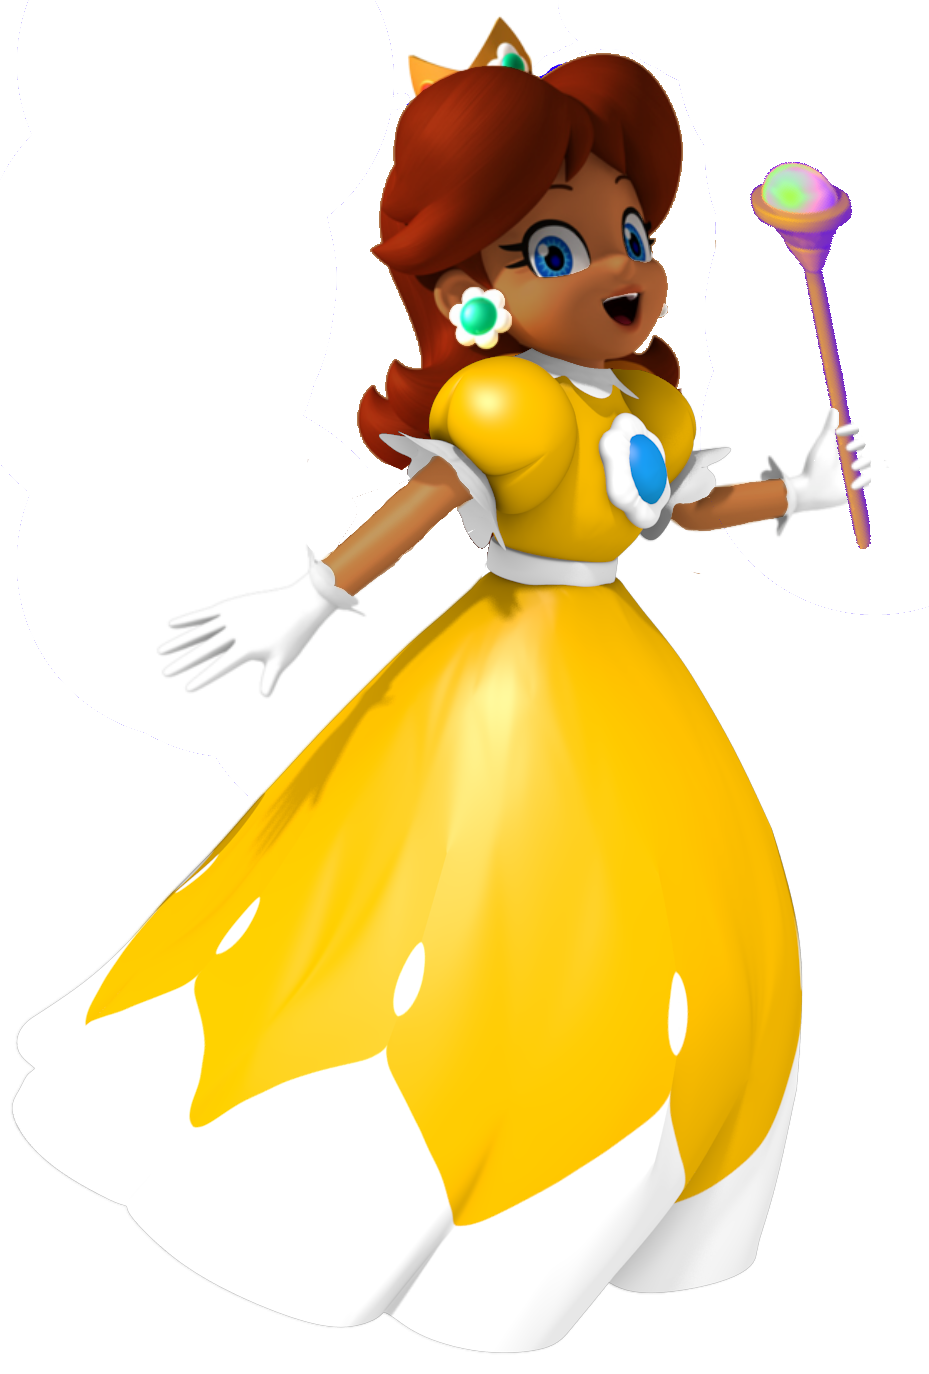 Princess Daisy and the Legend of the Sarasaland Scepters | Fantendo